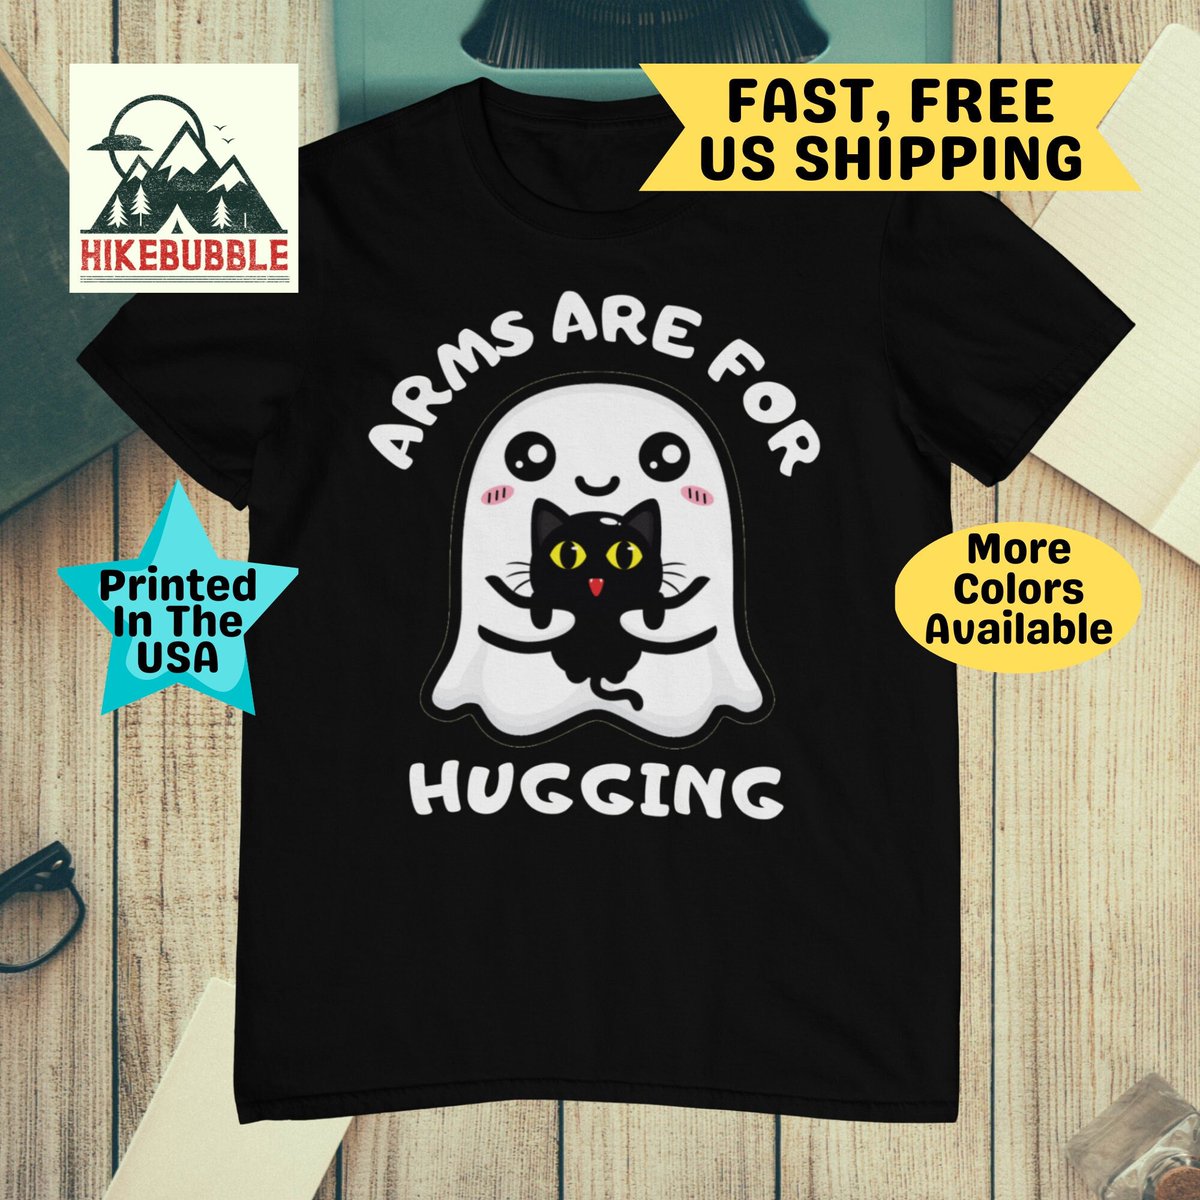 Arms Are For Hugging. Social Justice, non violence, human rights, anti war shirt, stand up, Enough Is Enough, Liberal Gifts etsy.me/3lYeLHE #armsareforhugging #enoughisenough #socialjustice #nonviolence #humanrights #antiwar #standup #liberalgifts #endgunviolen